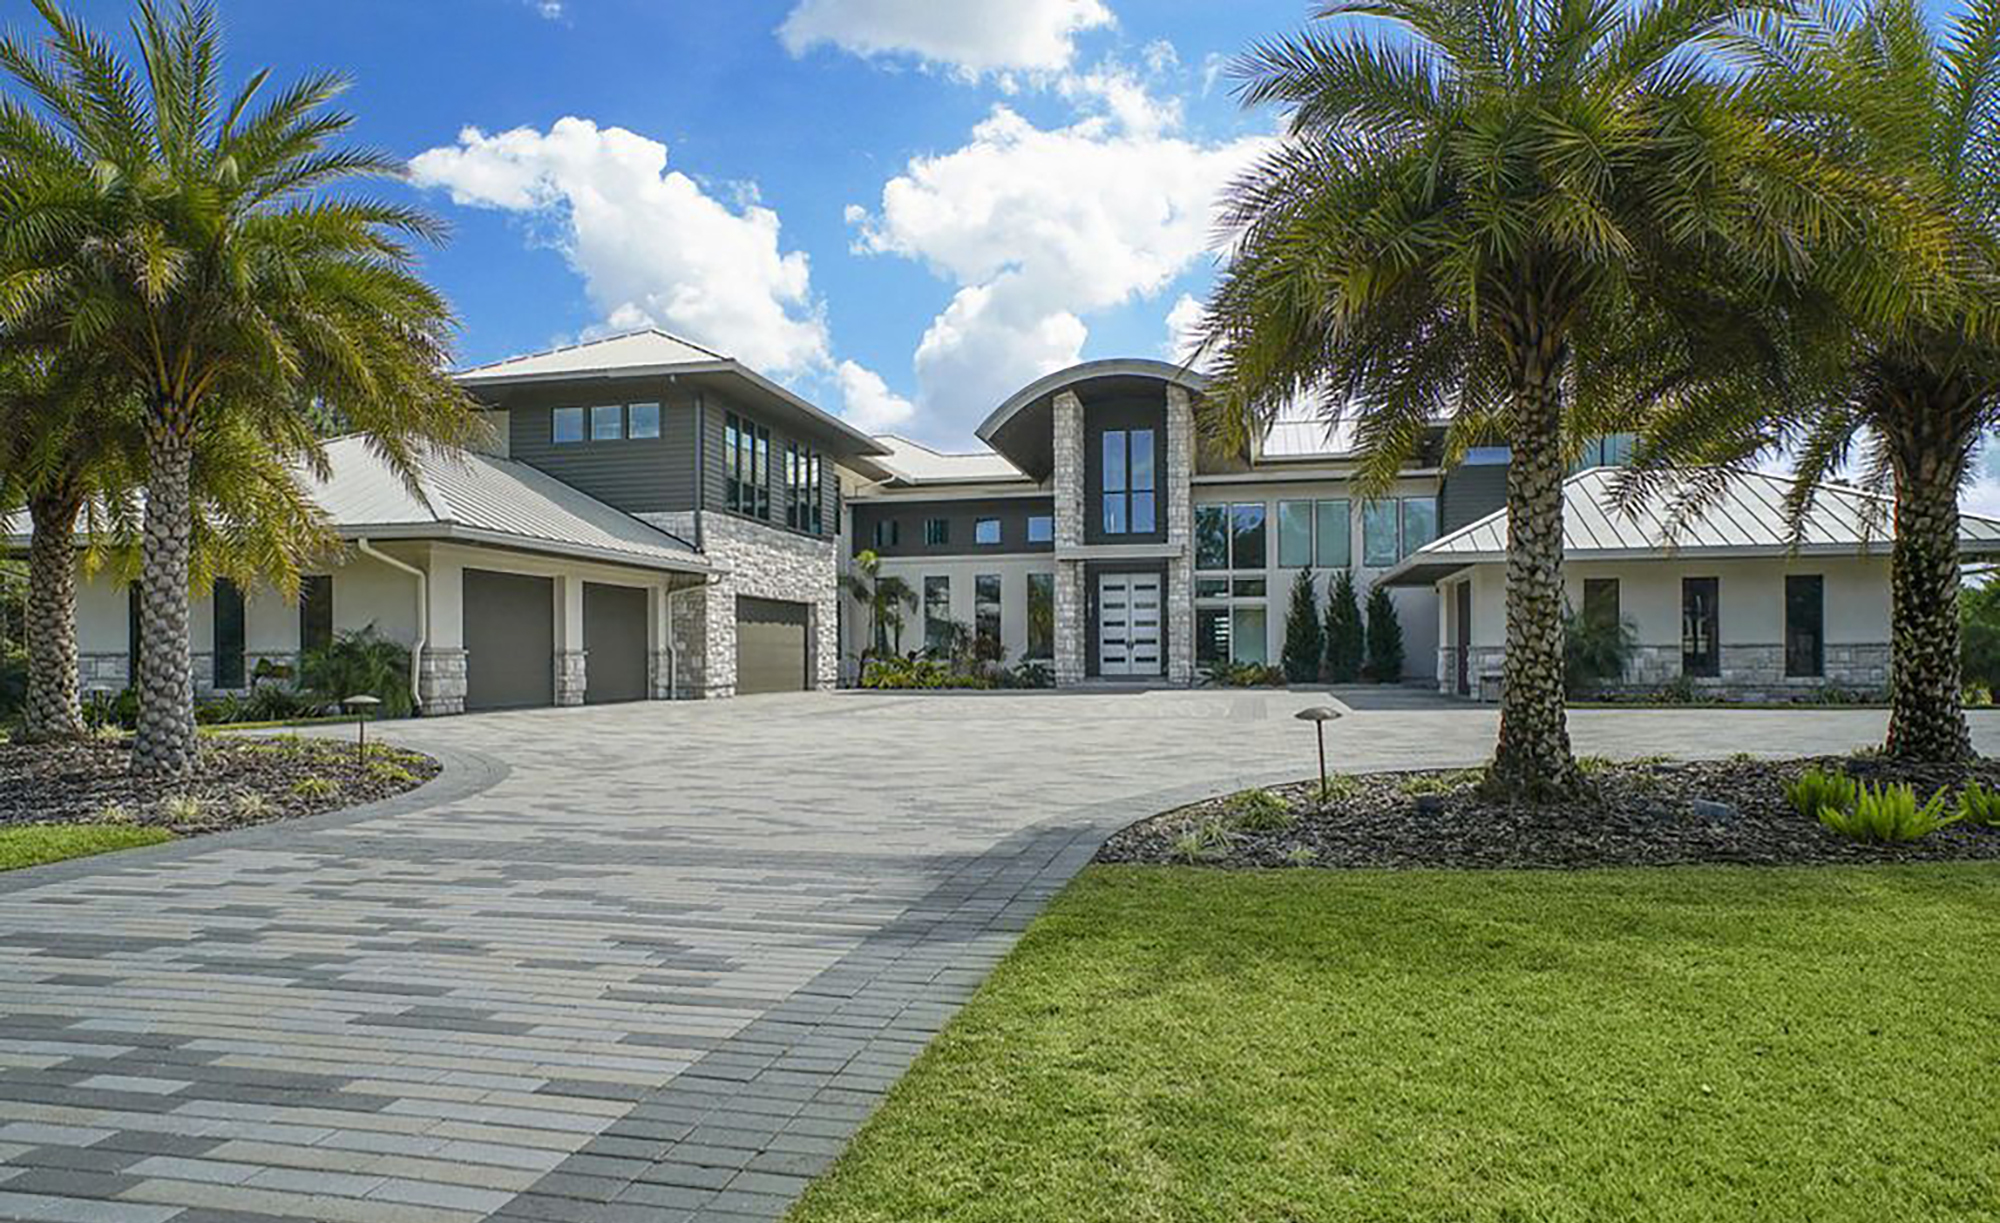 Tim Tebow paid $2.99 million for this home in Glen Kernan Golf & Country Club in South Jacksonville.